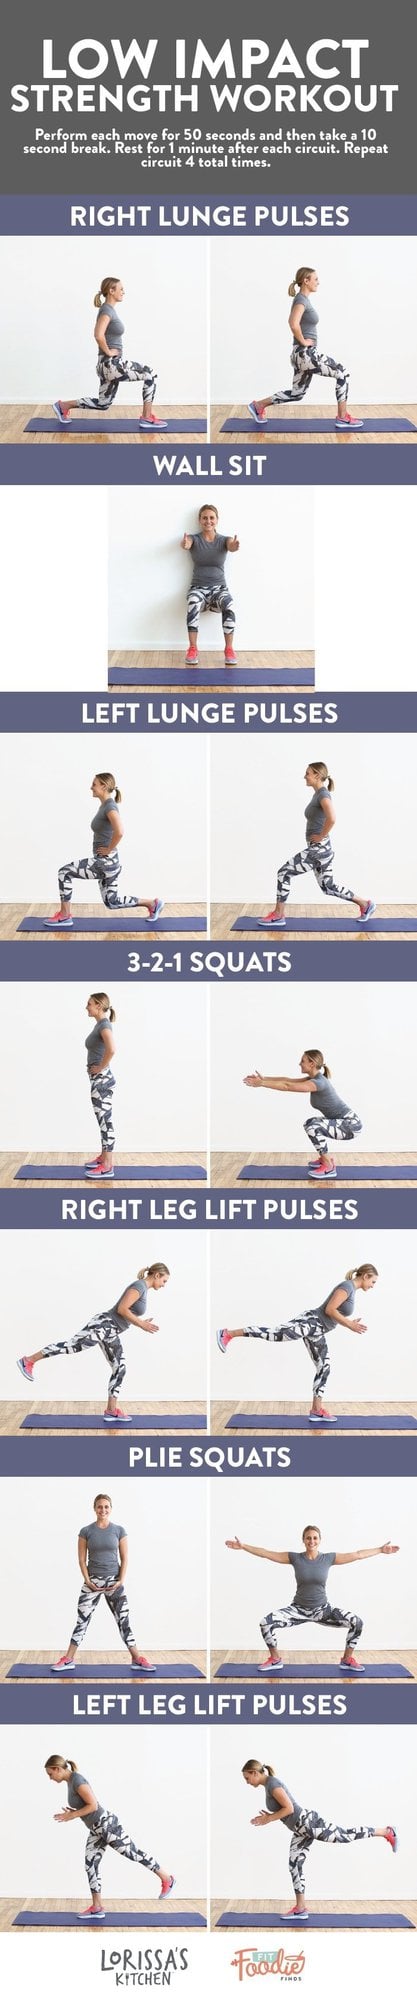 Looking for a low-impact workout? Try this 32-minute low impact strength workout that will fatigue your muscles and leave you shakey! These exercises are great for pregnant mamas, injury recovery, and anyone who wants a good burn.